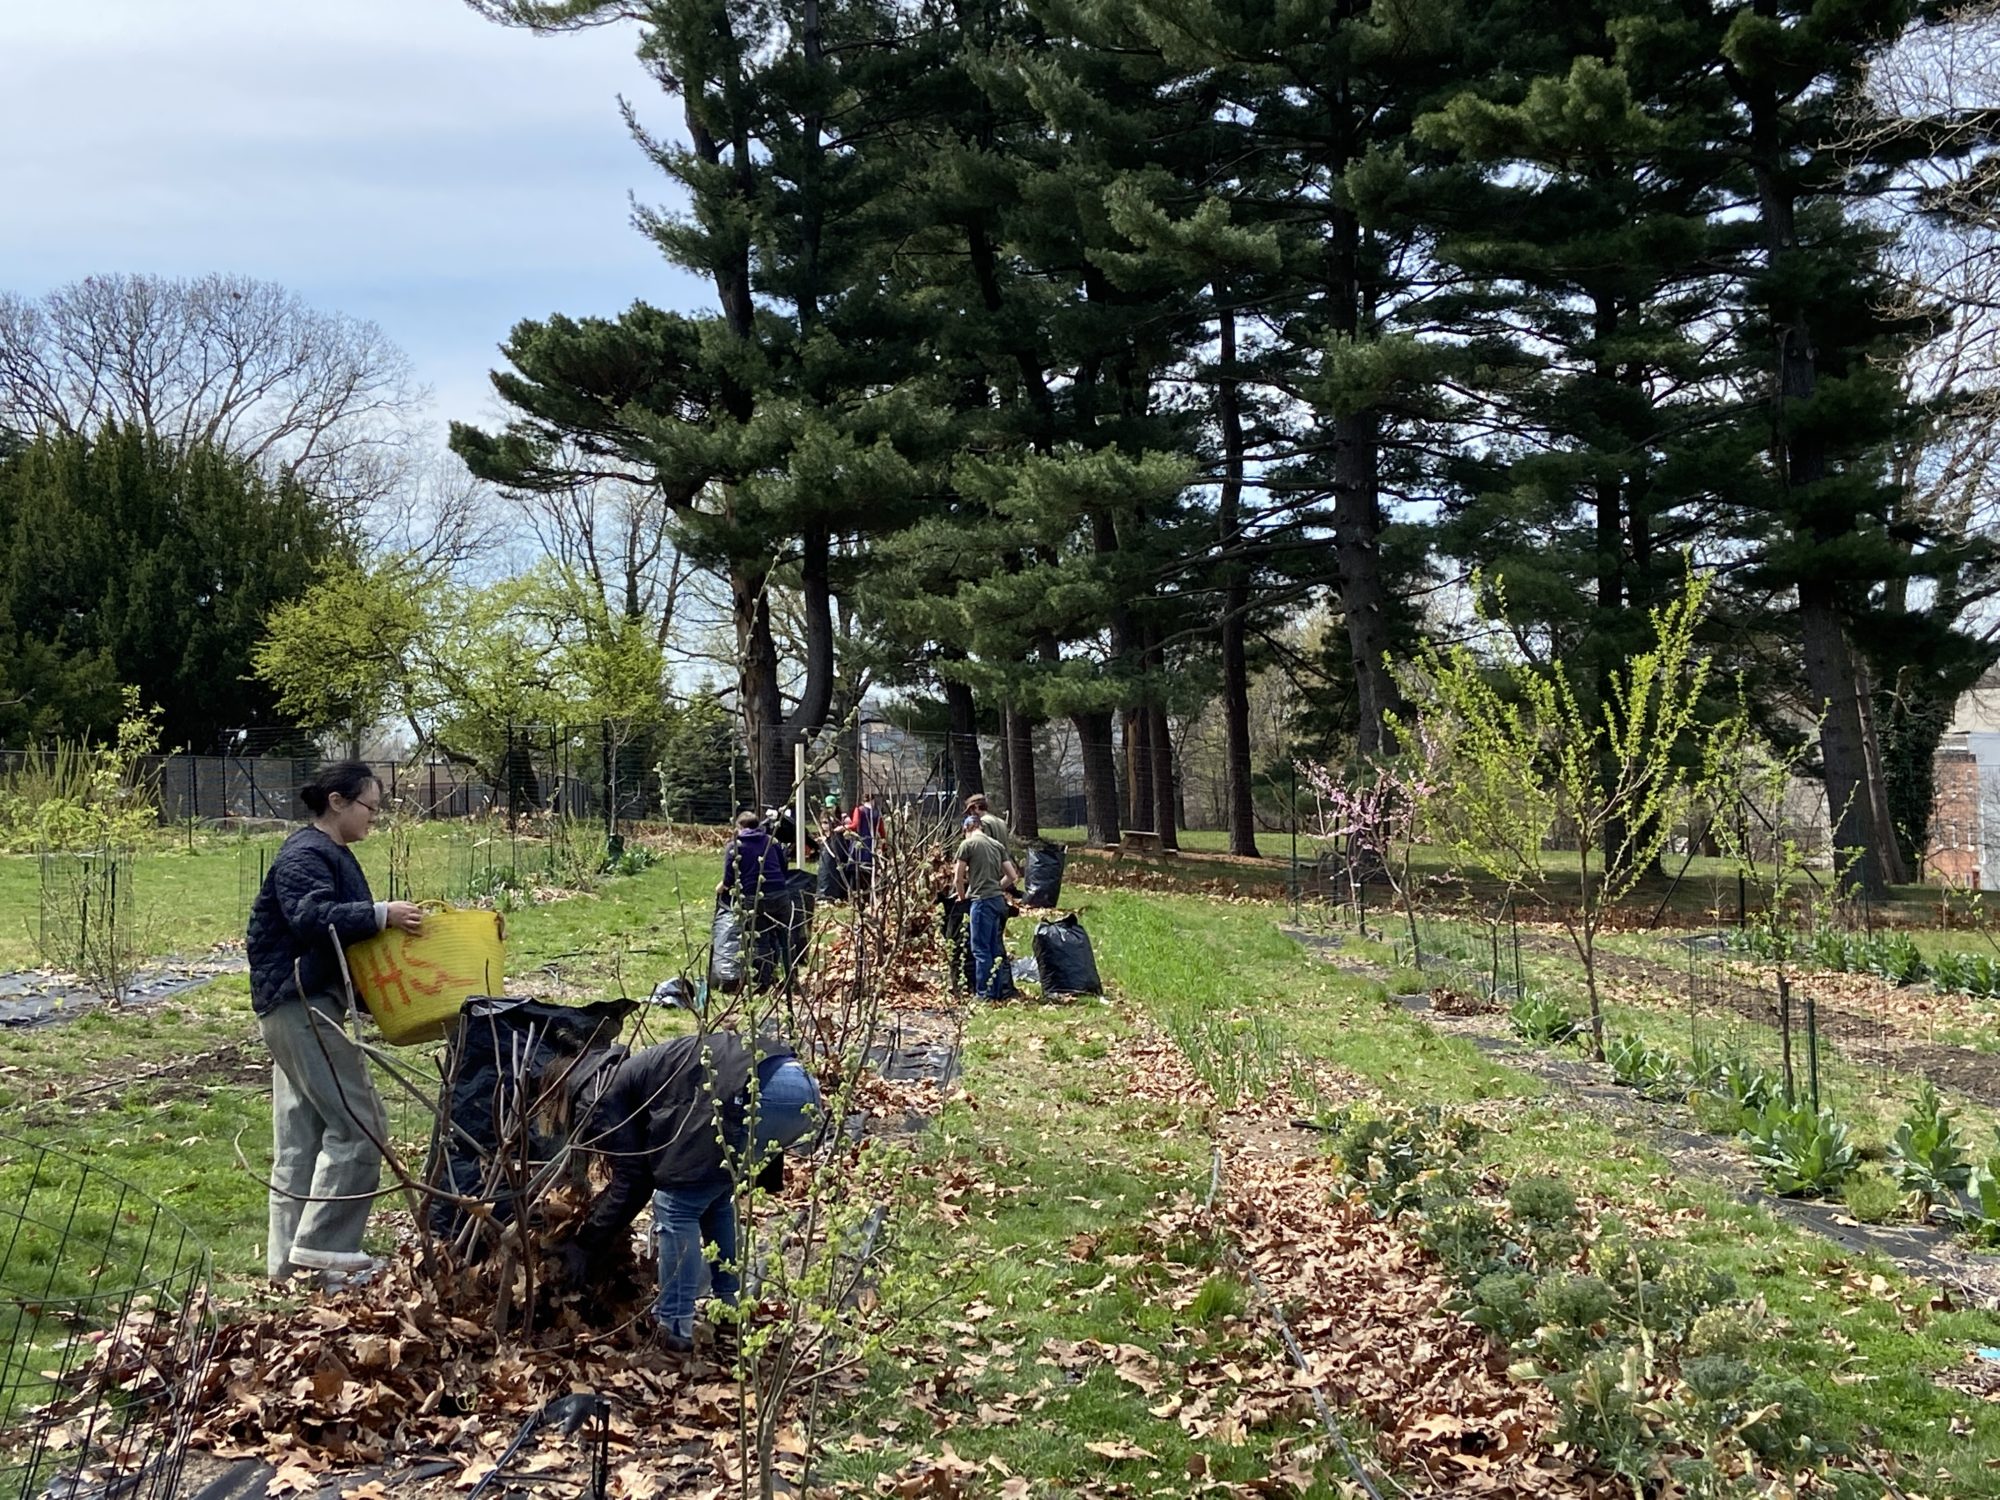 A group of about 10 people are working on various fig trees at the Learning Orchard, filling large black trash bags with leaves. Some of the other trees are blooming, and the pine grove is prominent in the background.